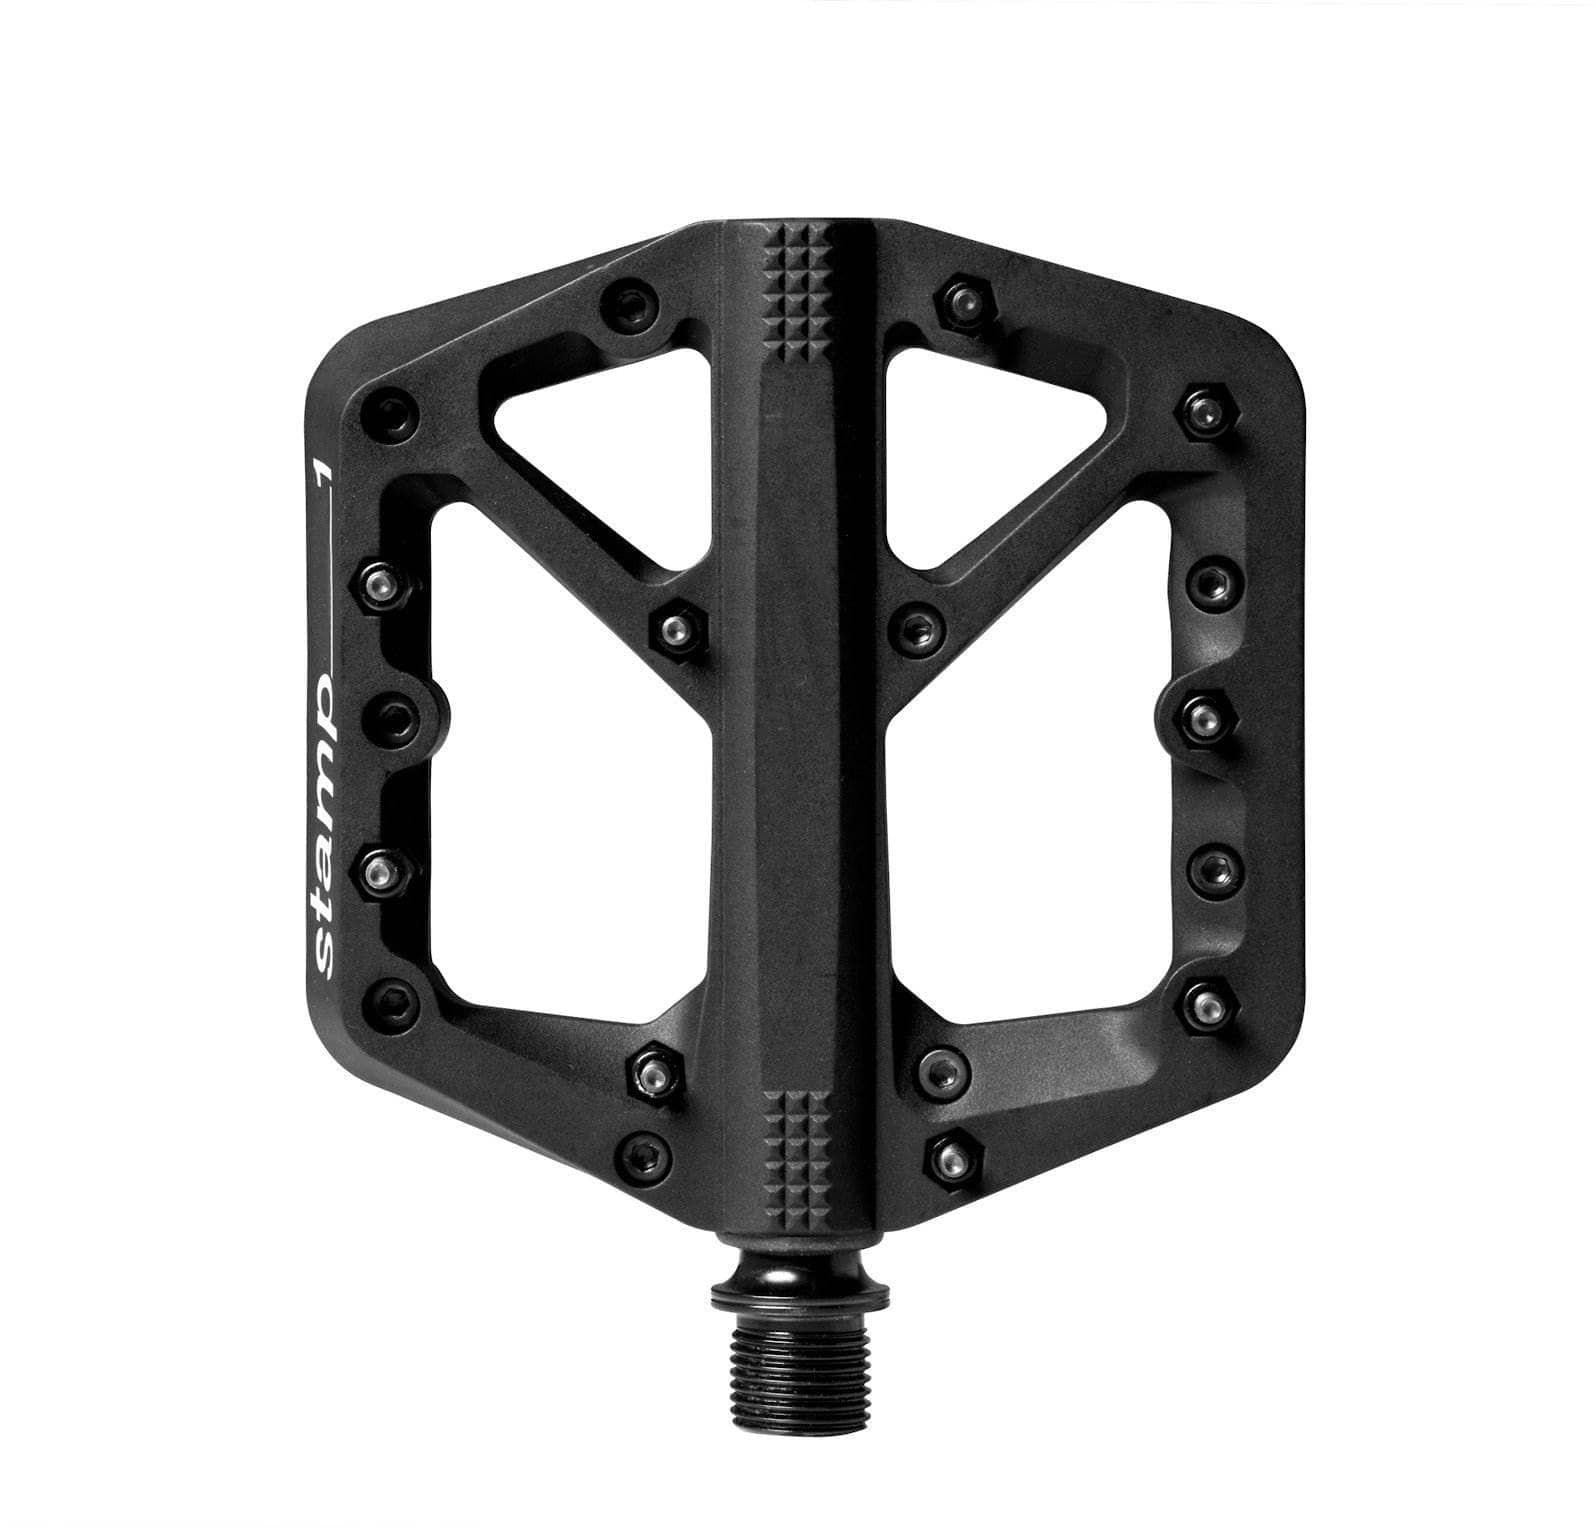 Crankbrothers Crankbrothers Stamp 1 Pedal Black / Small